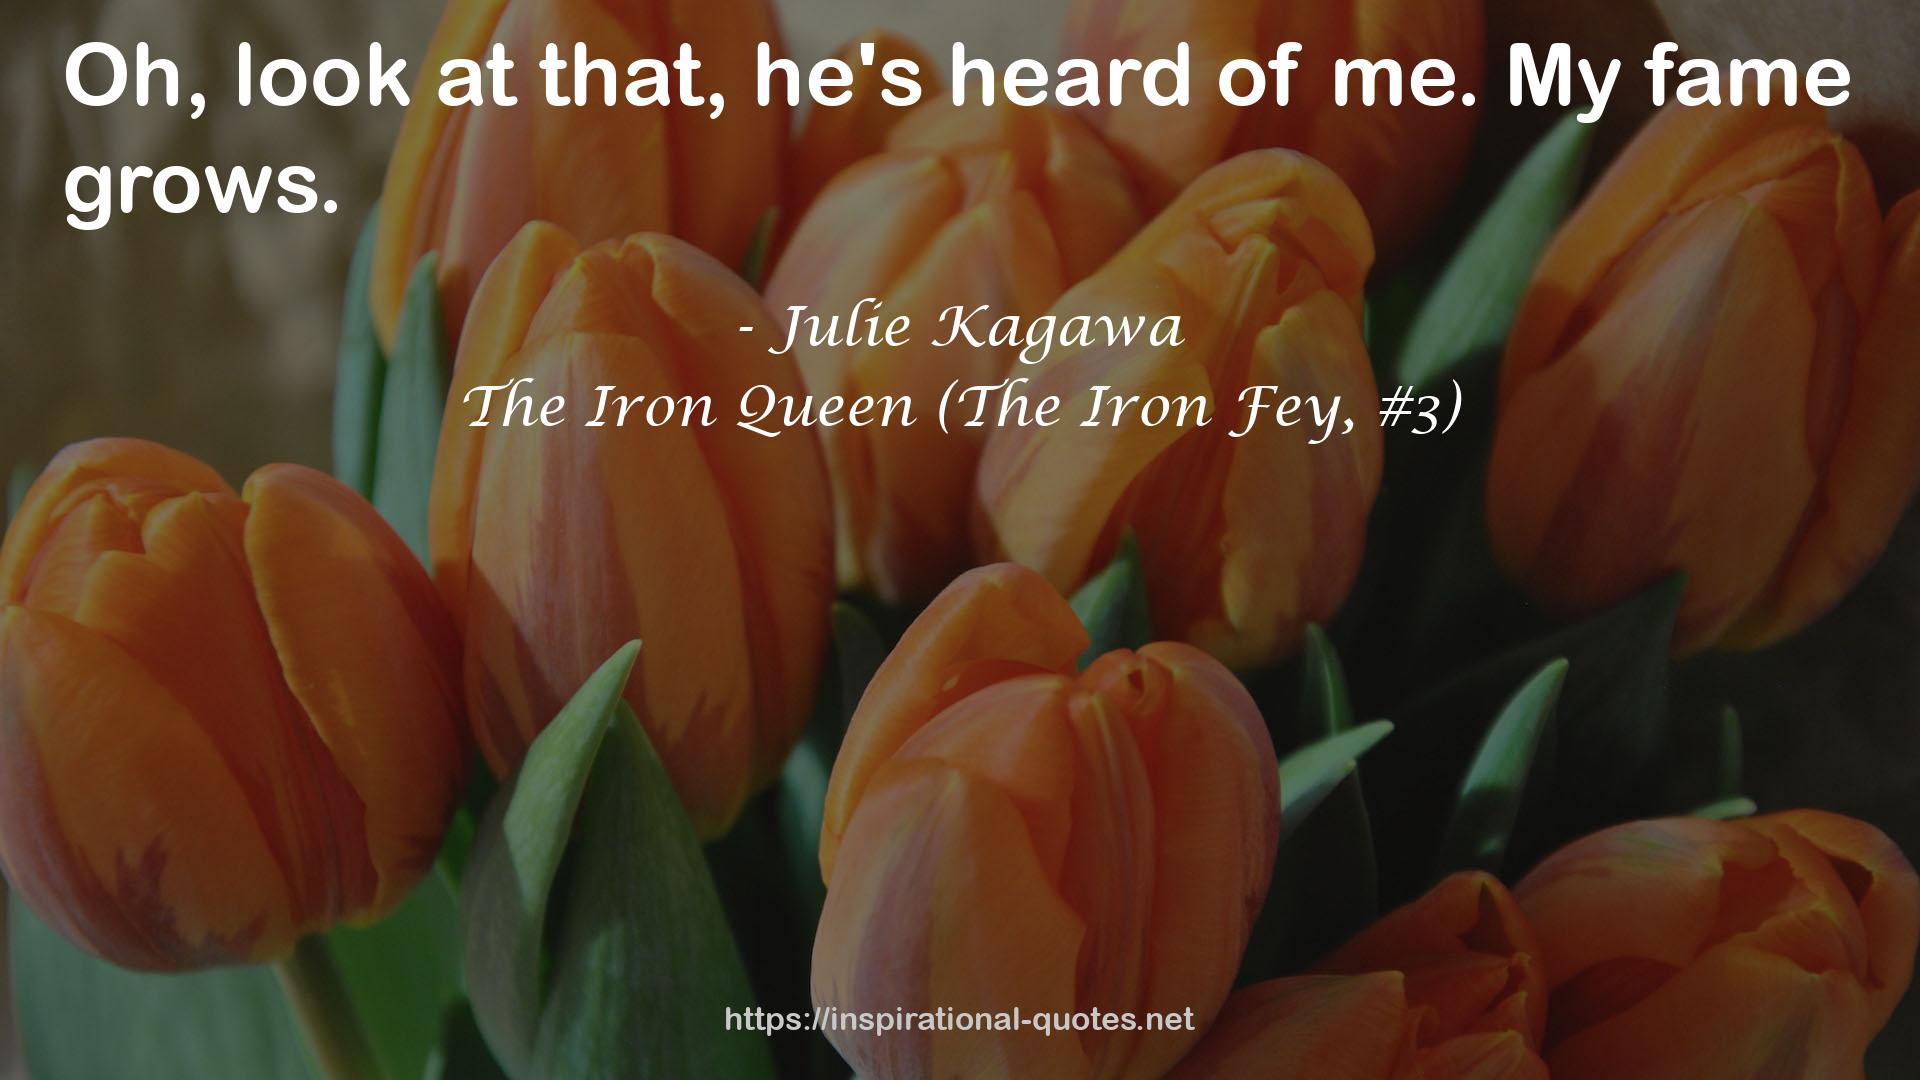 The Iron Queen (The Iron Fey, #3) QUOTES